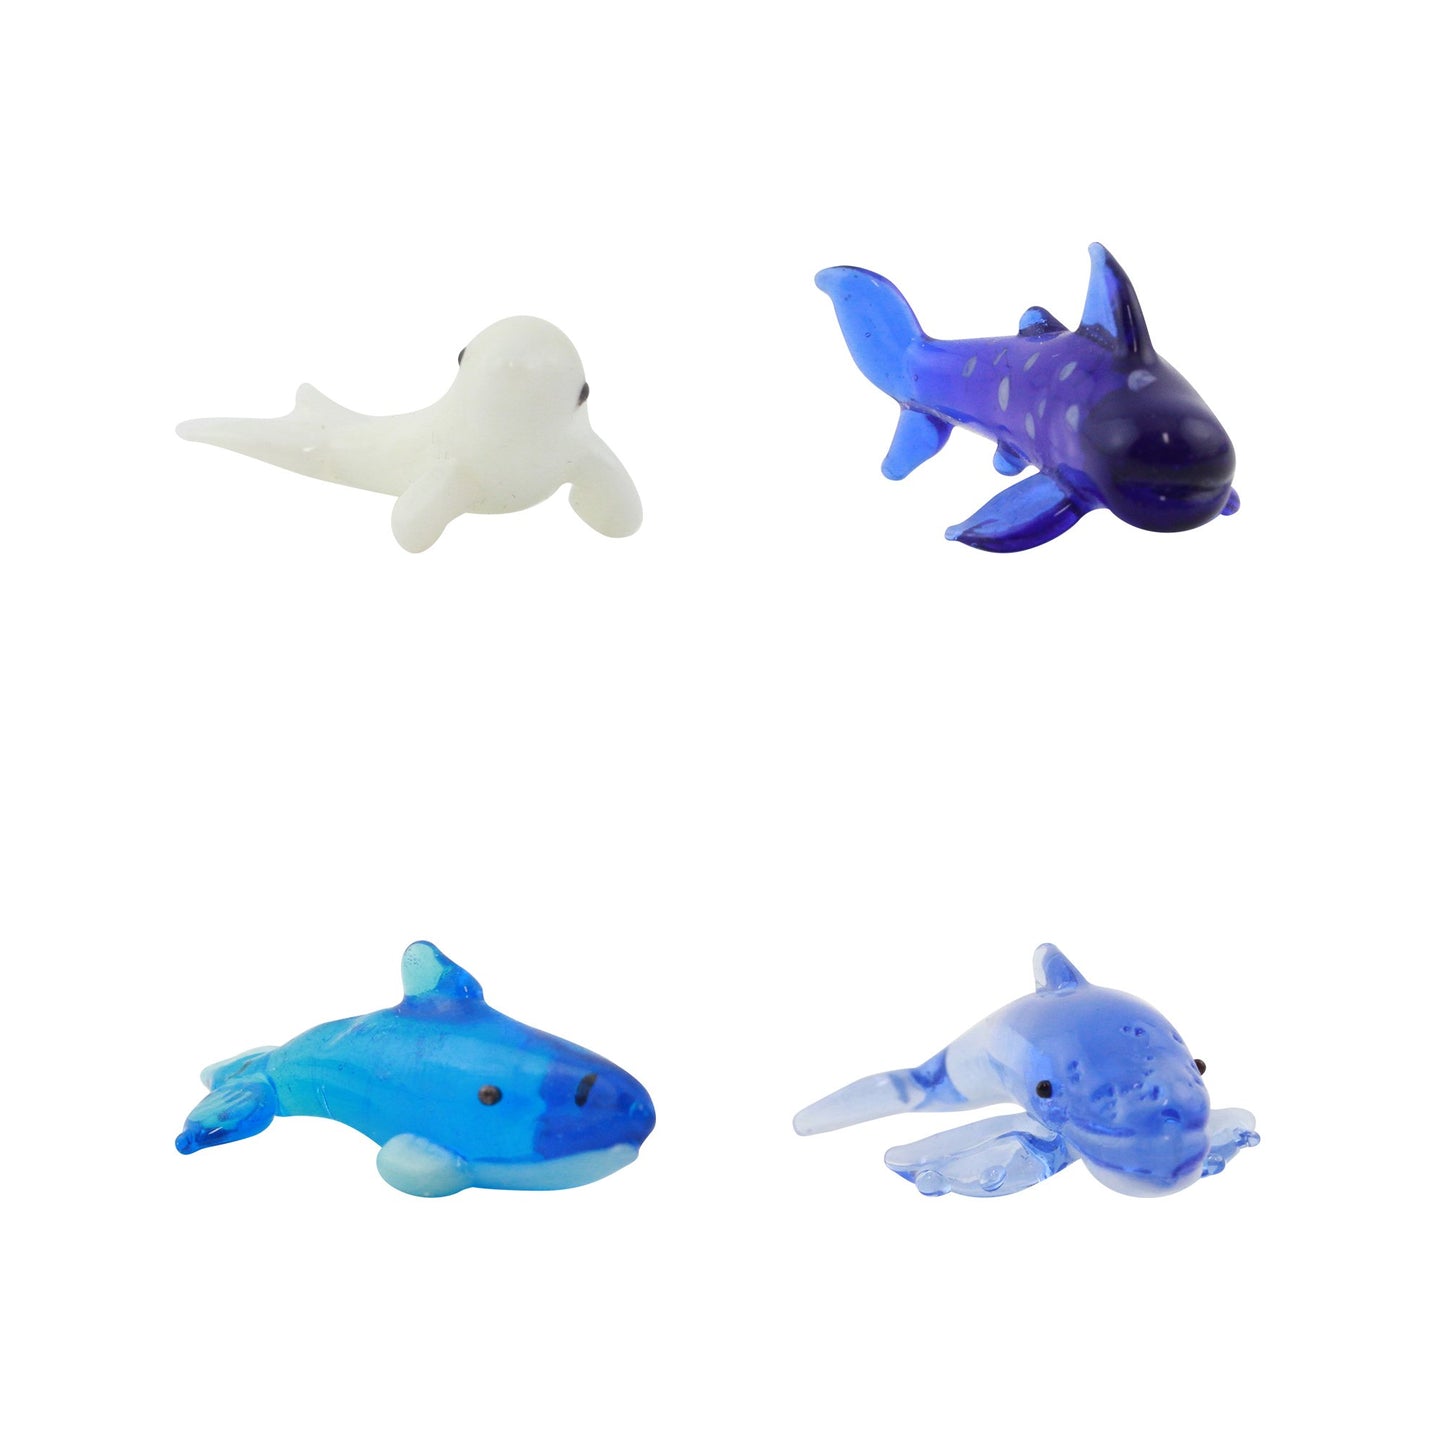 LookingGlass Sea Animals 1 Set Minature Glass Collectibles Product Image